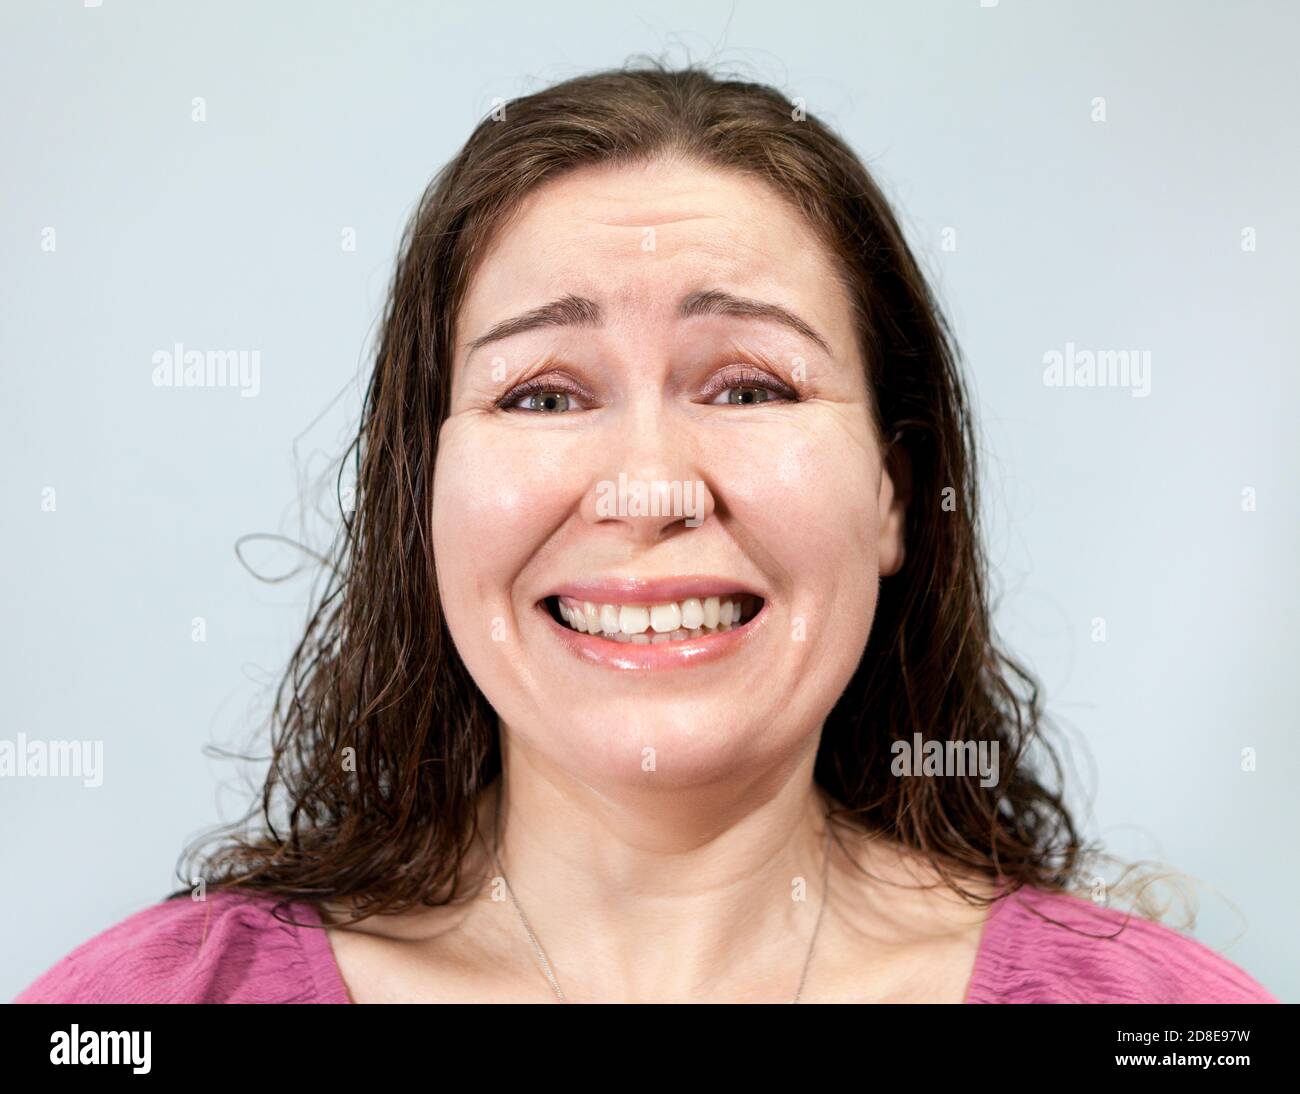 Uncertainty and embarrassment on the face of an adult woman, portrait on grey background, emotions series Stock Photo